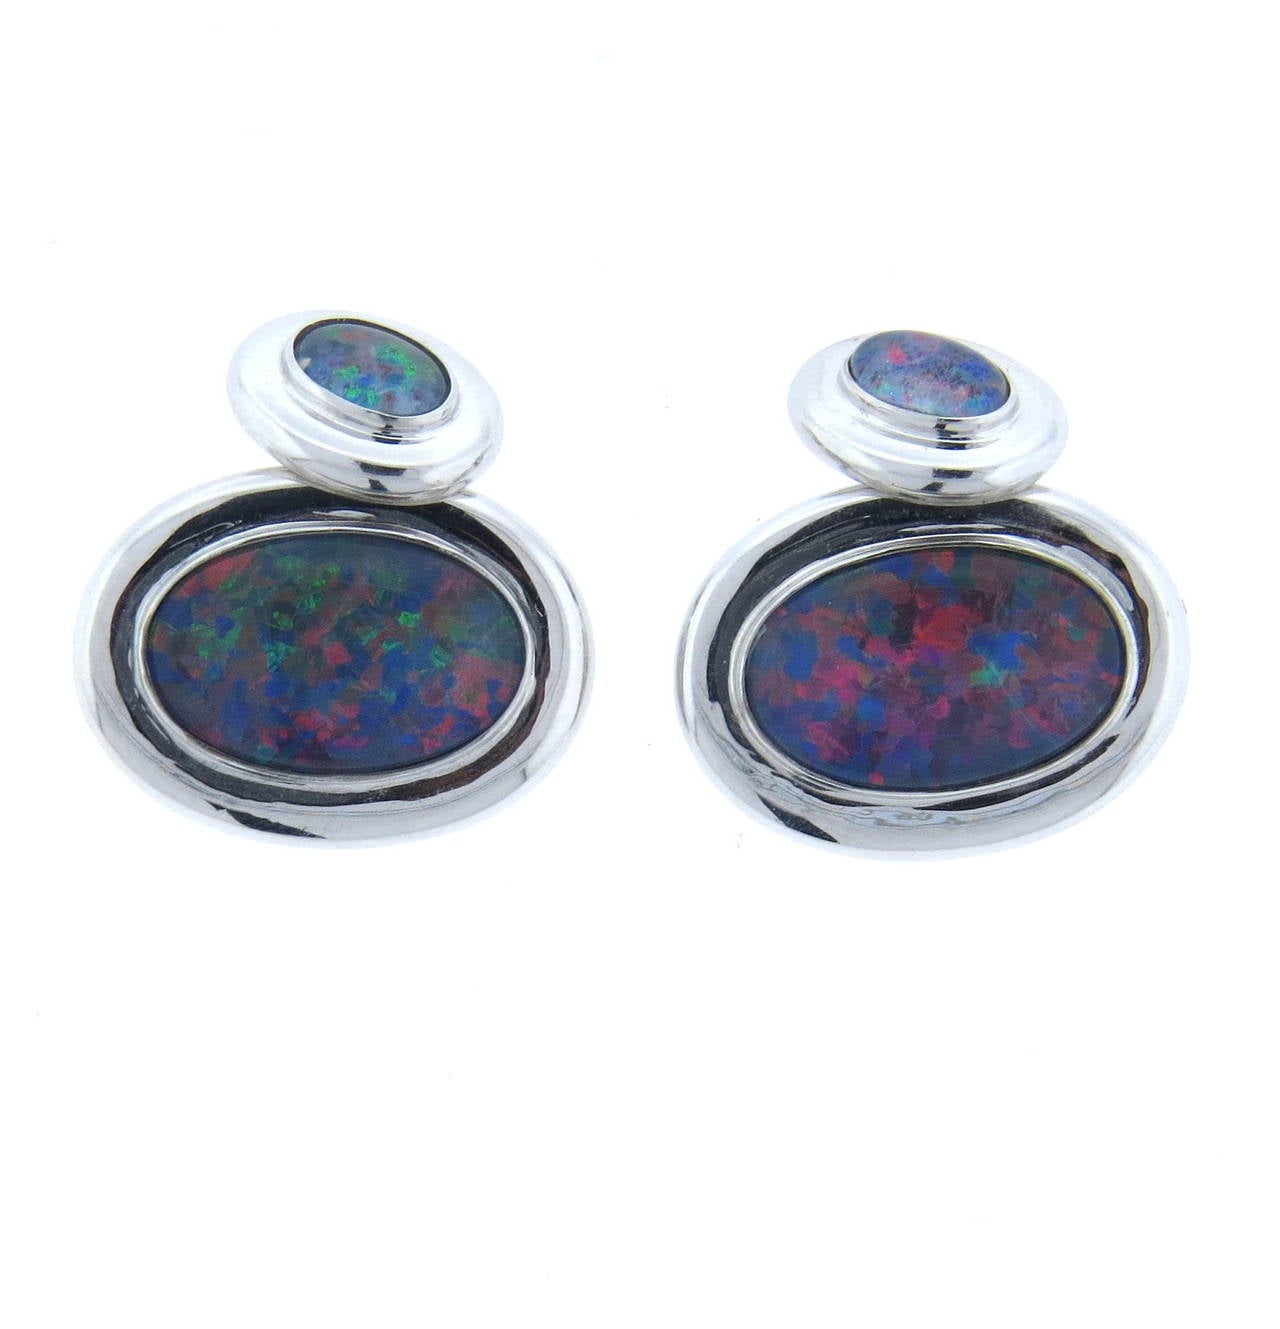 18k gold oval cufflinks, set with black opal doublets. Cufflink top measures 21mm x 16mm, back - 12mm x 9mm.  weight - 16.8 grams